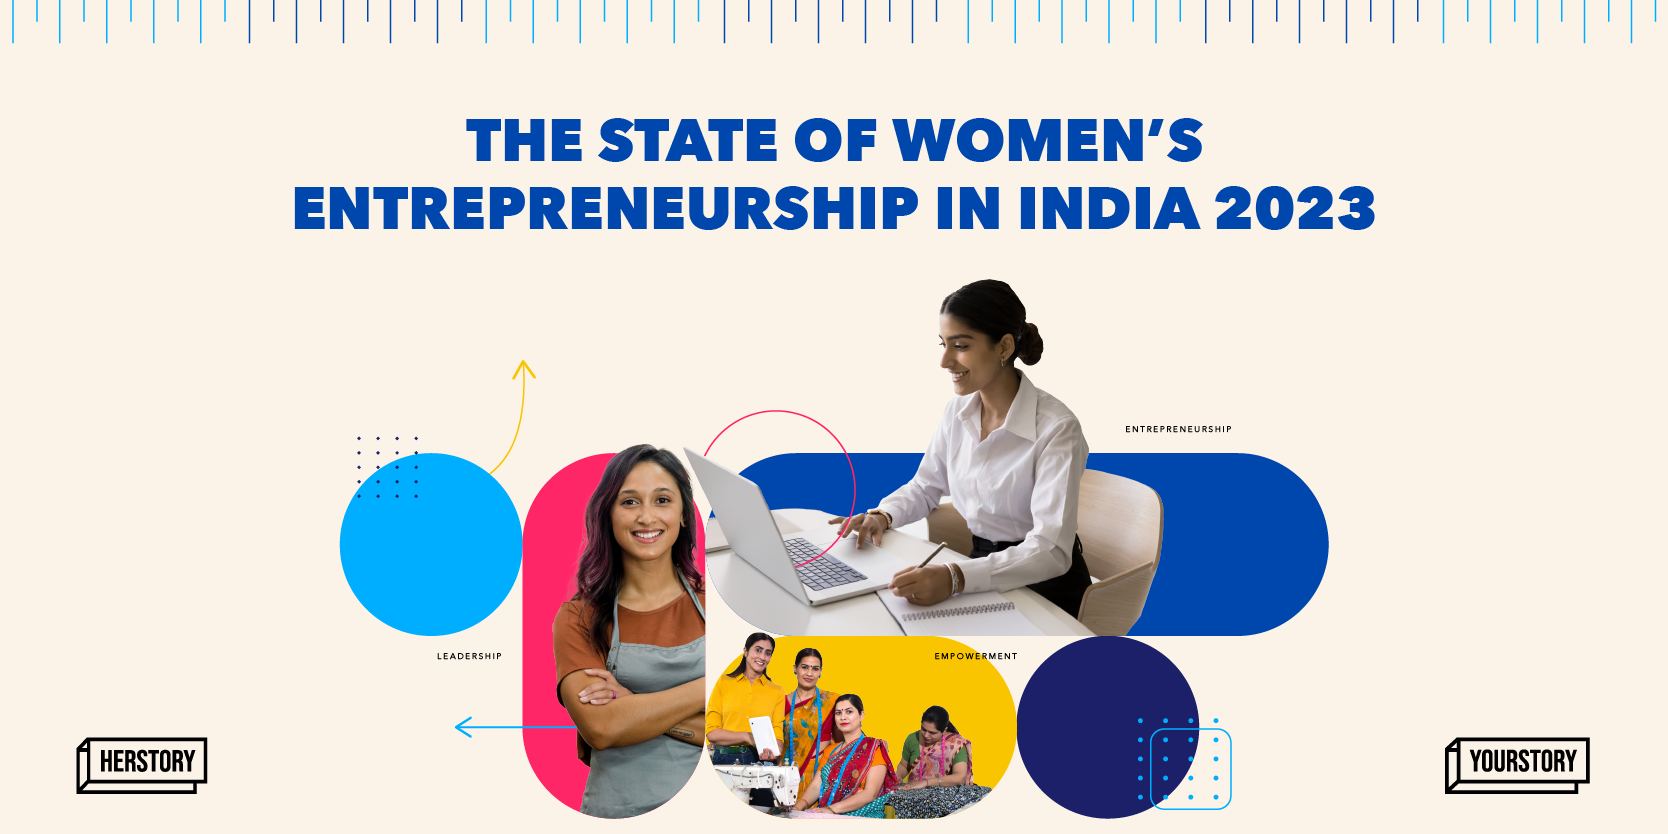 The State of Women's Entrepreneurship in India 2023: 10 stats that defined the year



